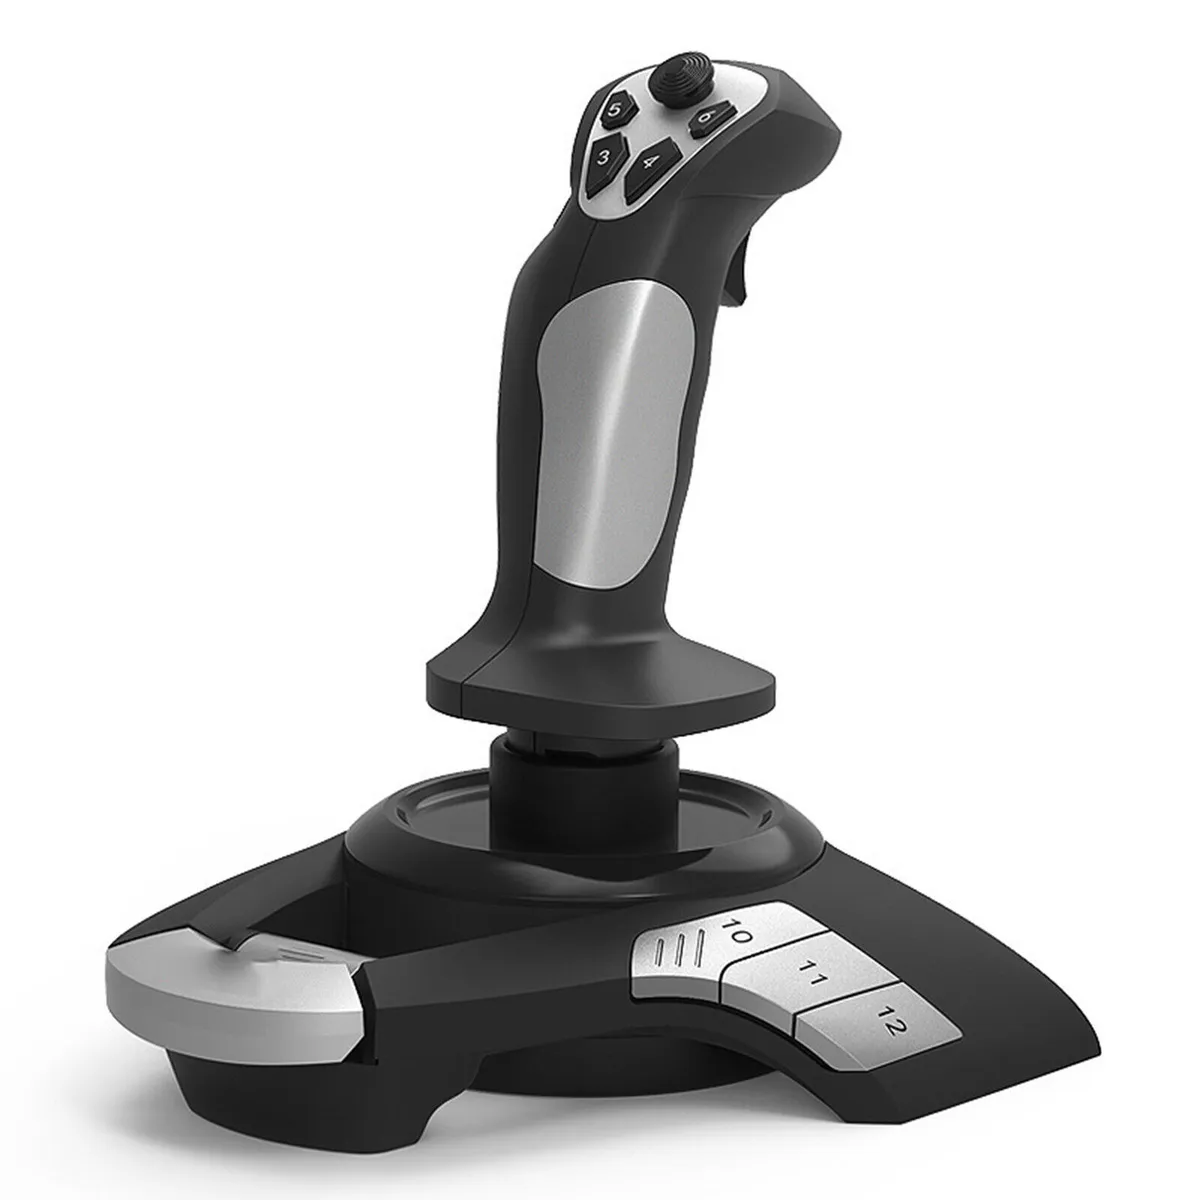 PXN-F16 Flight Stick Joystick Game Controller for PC Fly Aviation Games  Parts